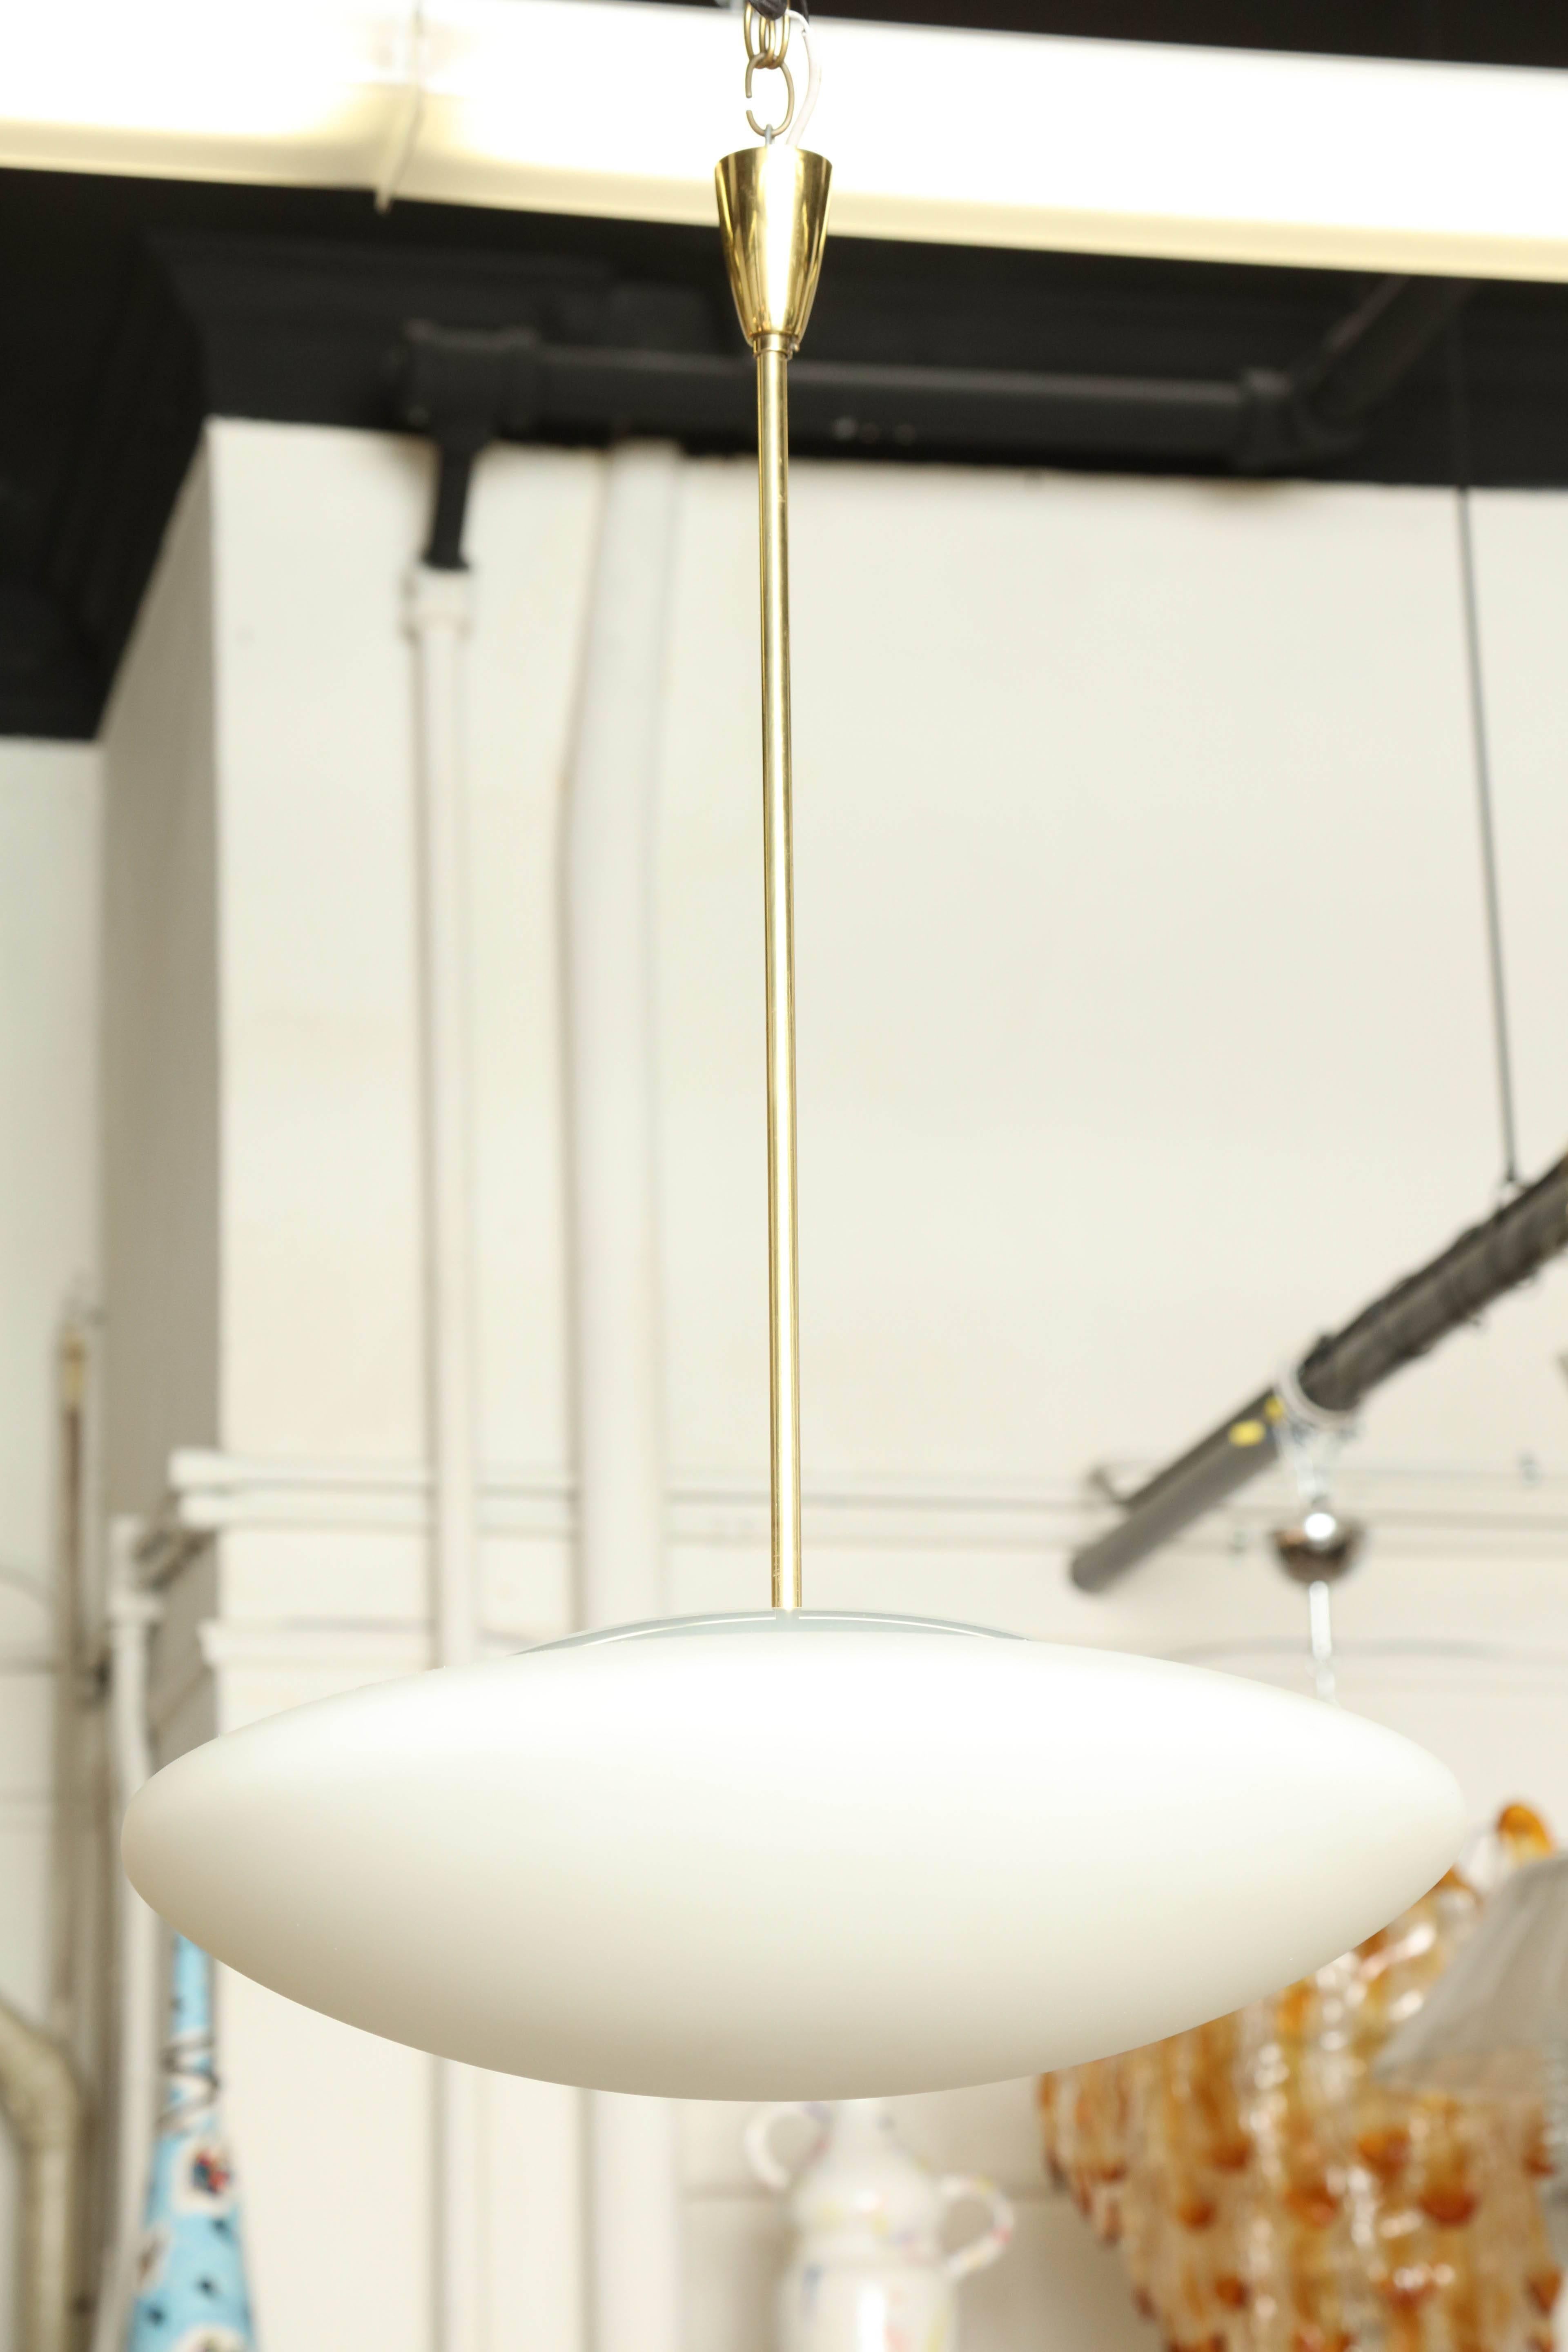 Modernist pendant light made in Milan 1950 by Fontana Arte, white blown opaline glass shade with a clear cover, where the brass rod connects to shade there is a brass piece with openings for the heat to escape, beautiful made, great in hall kitchen